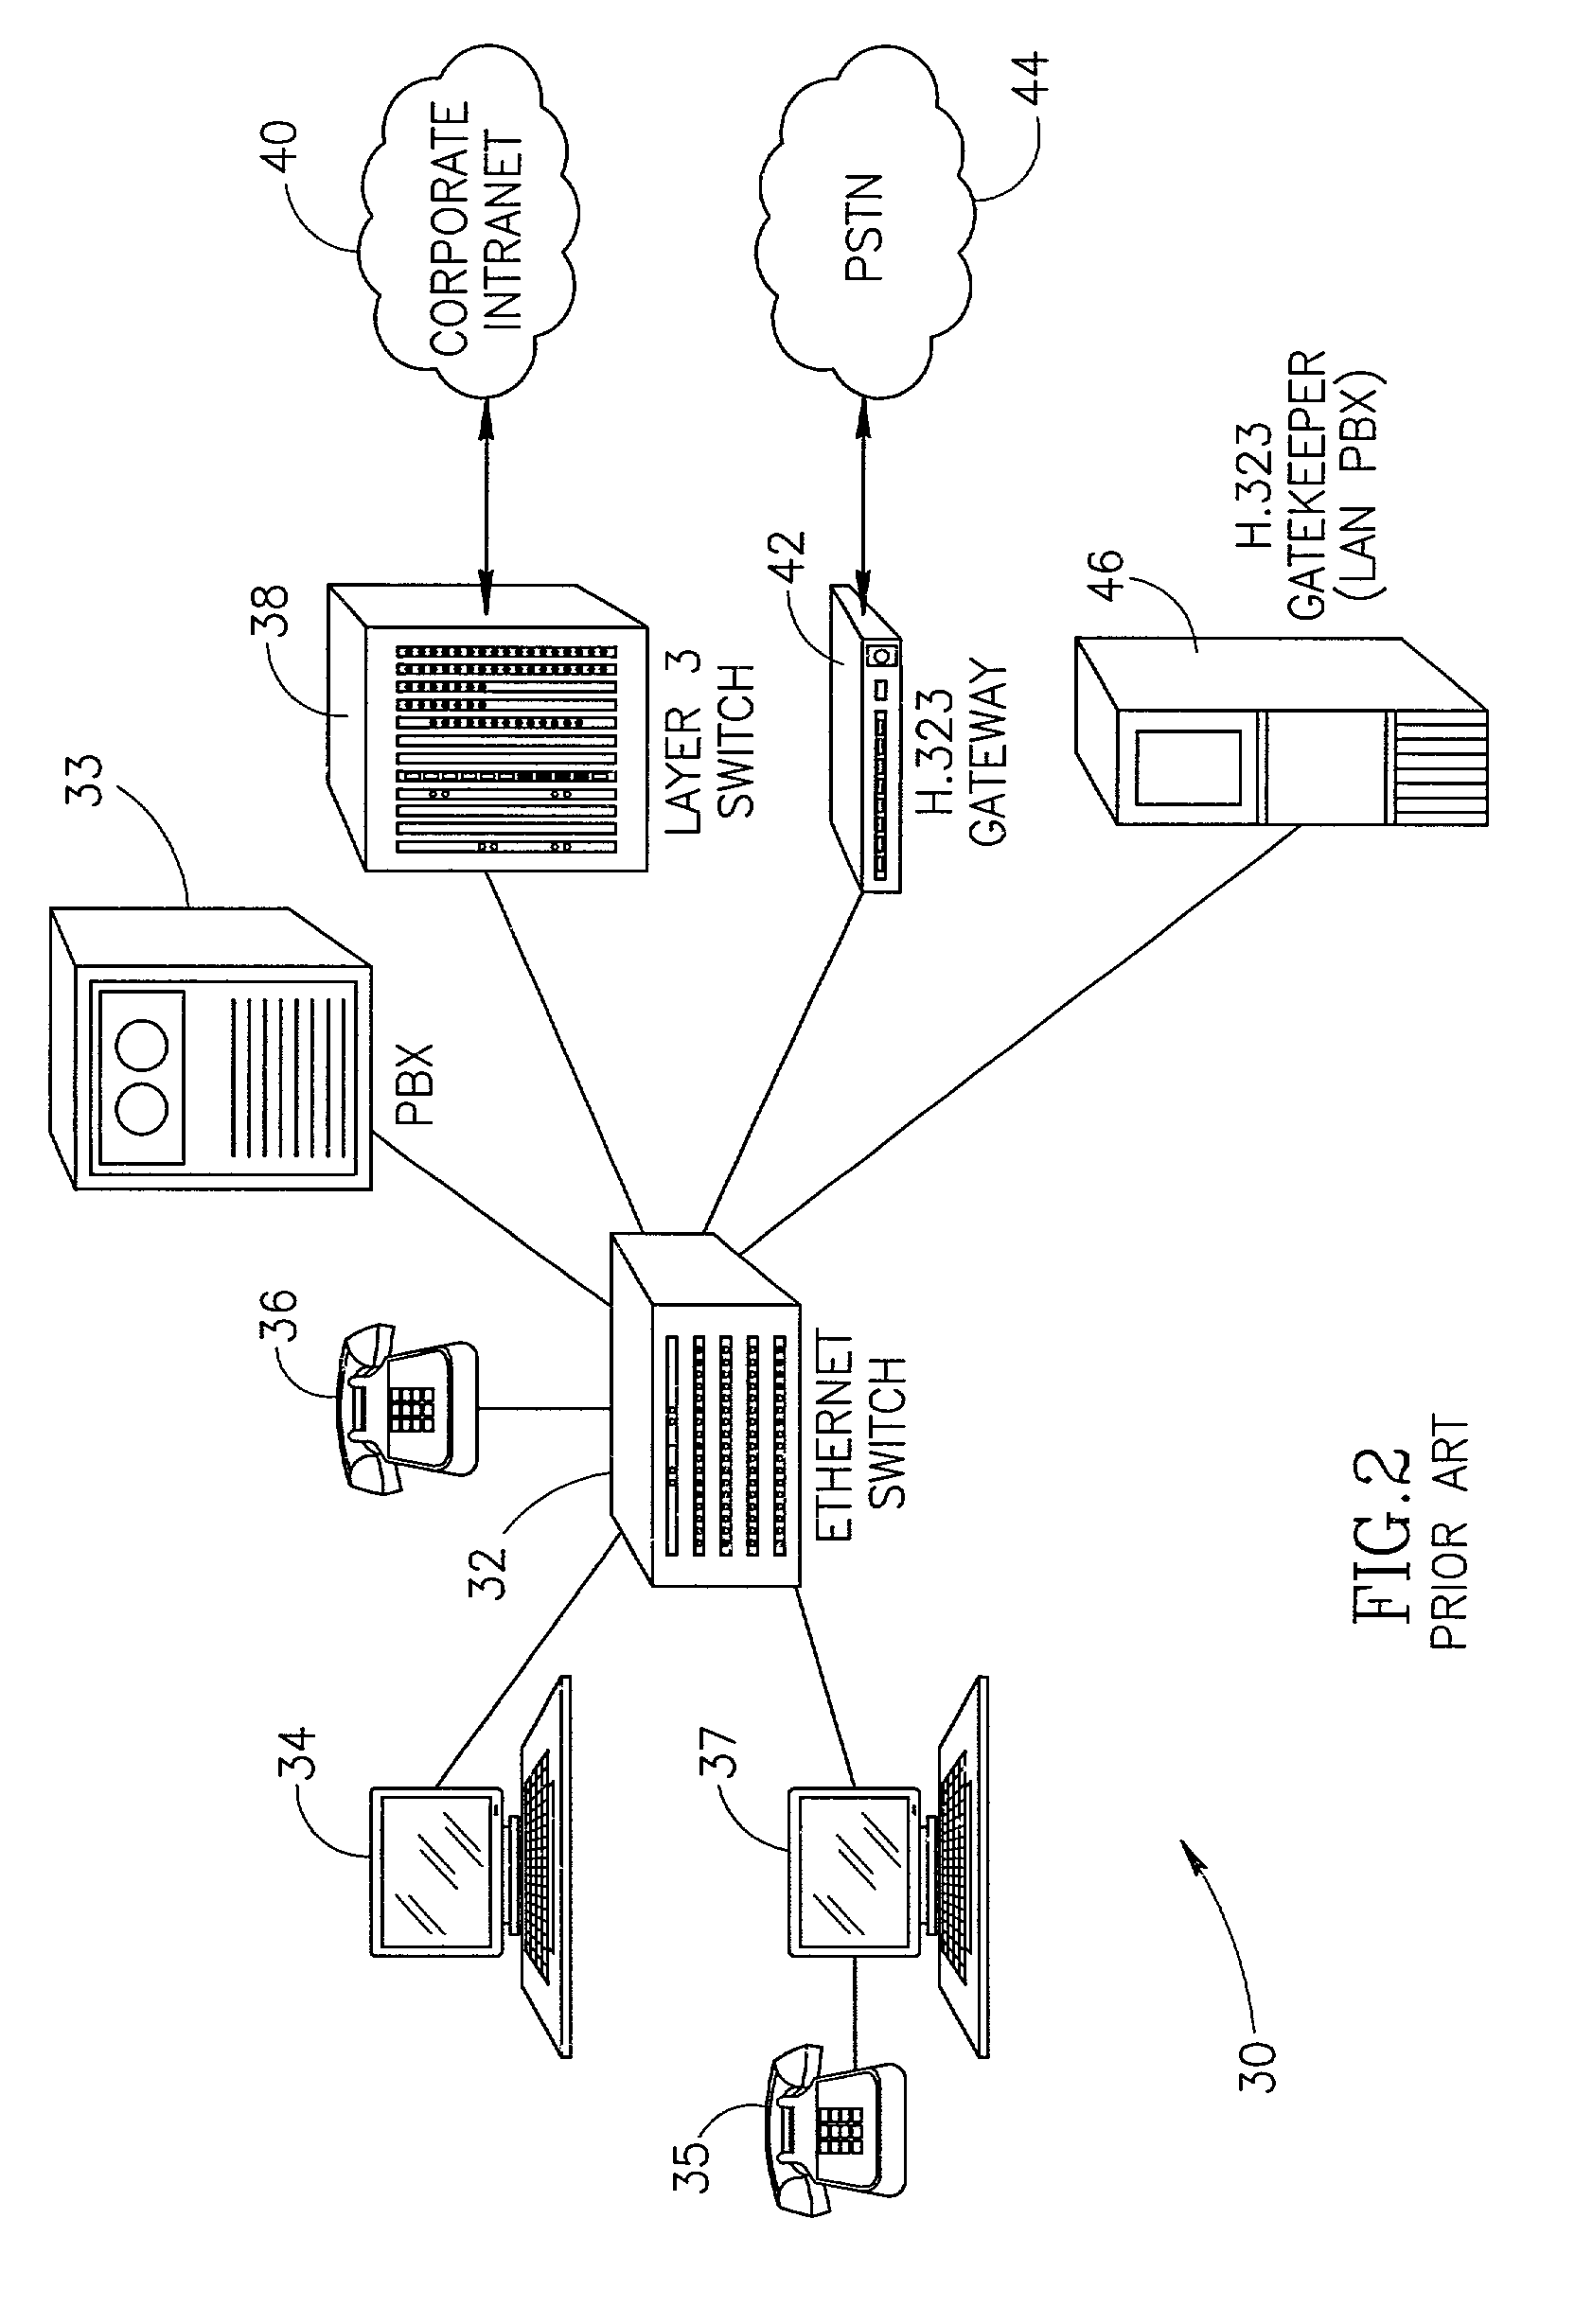 Four channel audio recording in a packet based network